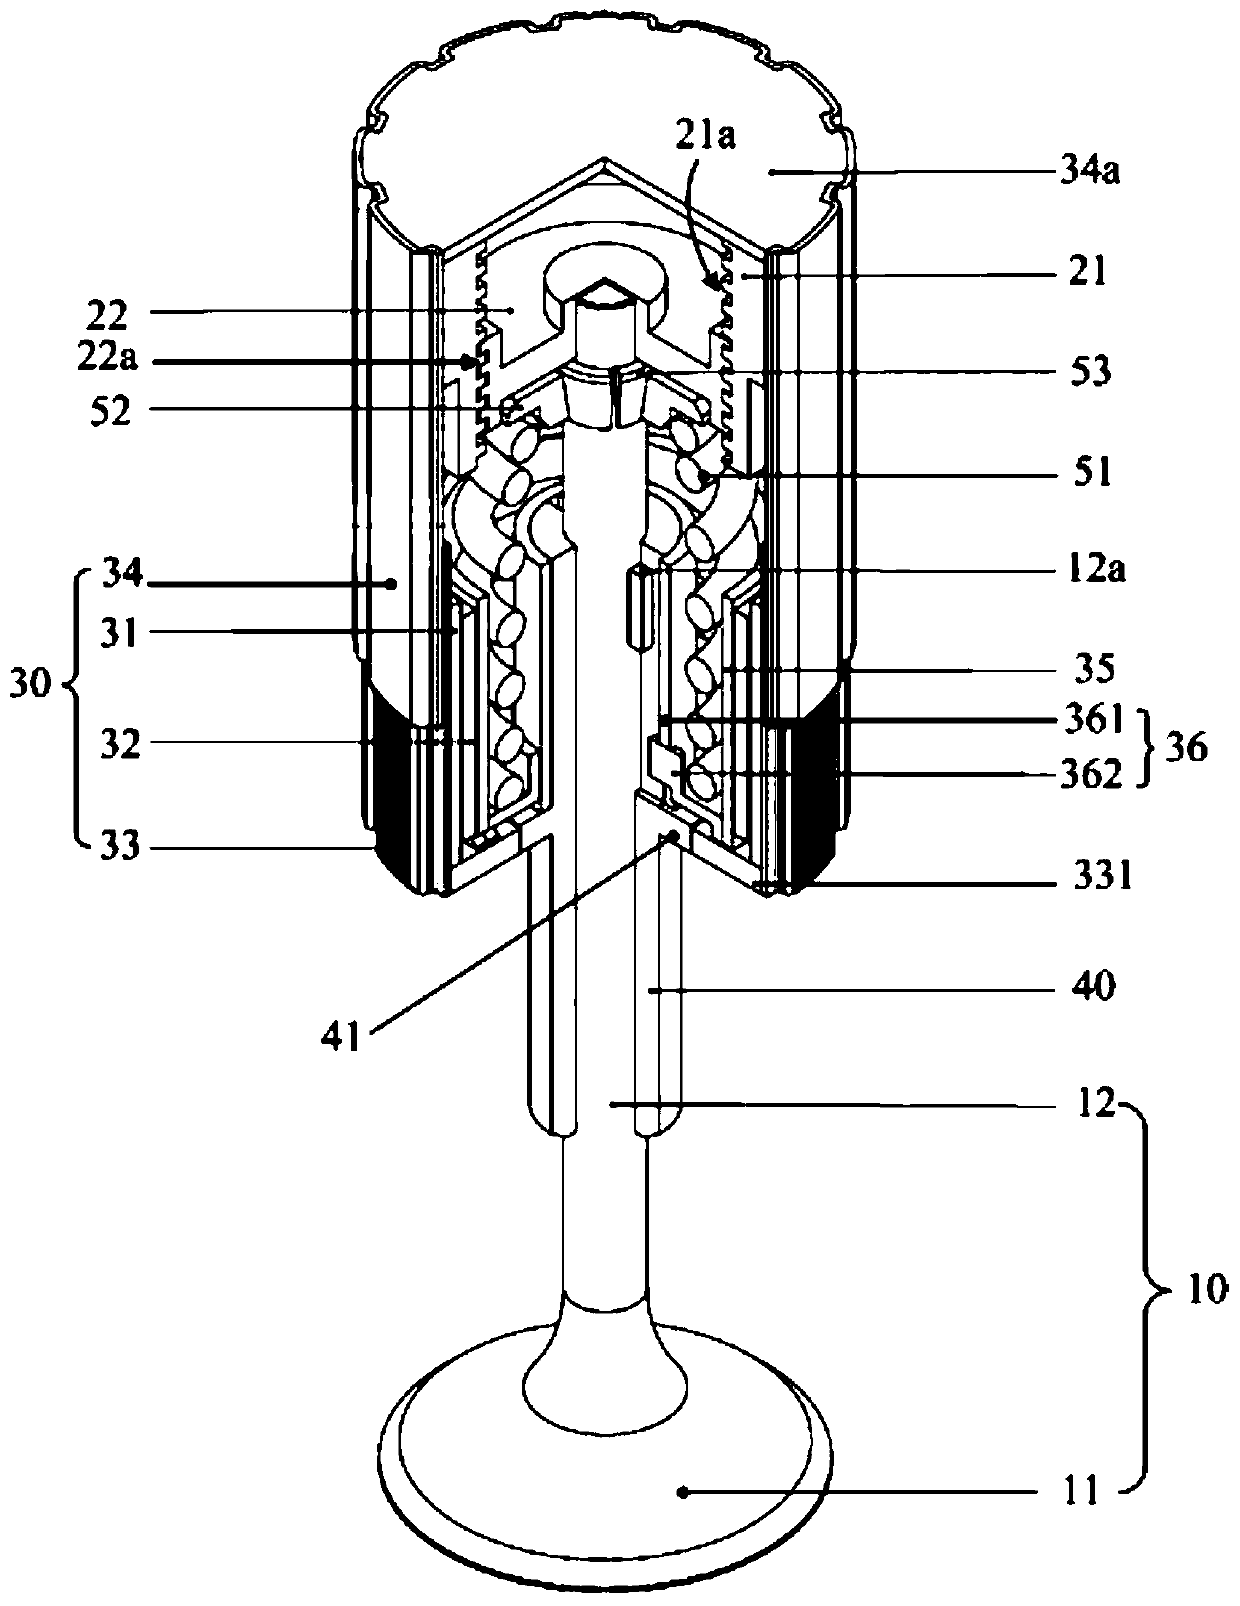 Variable valve lift system, engine and automobile